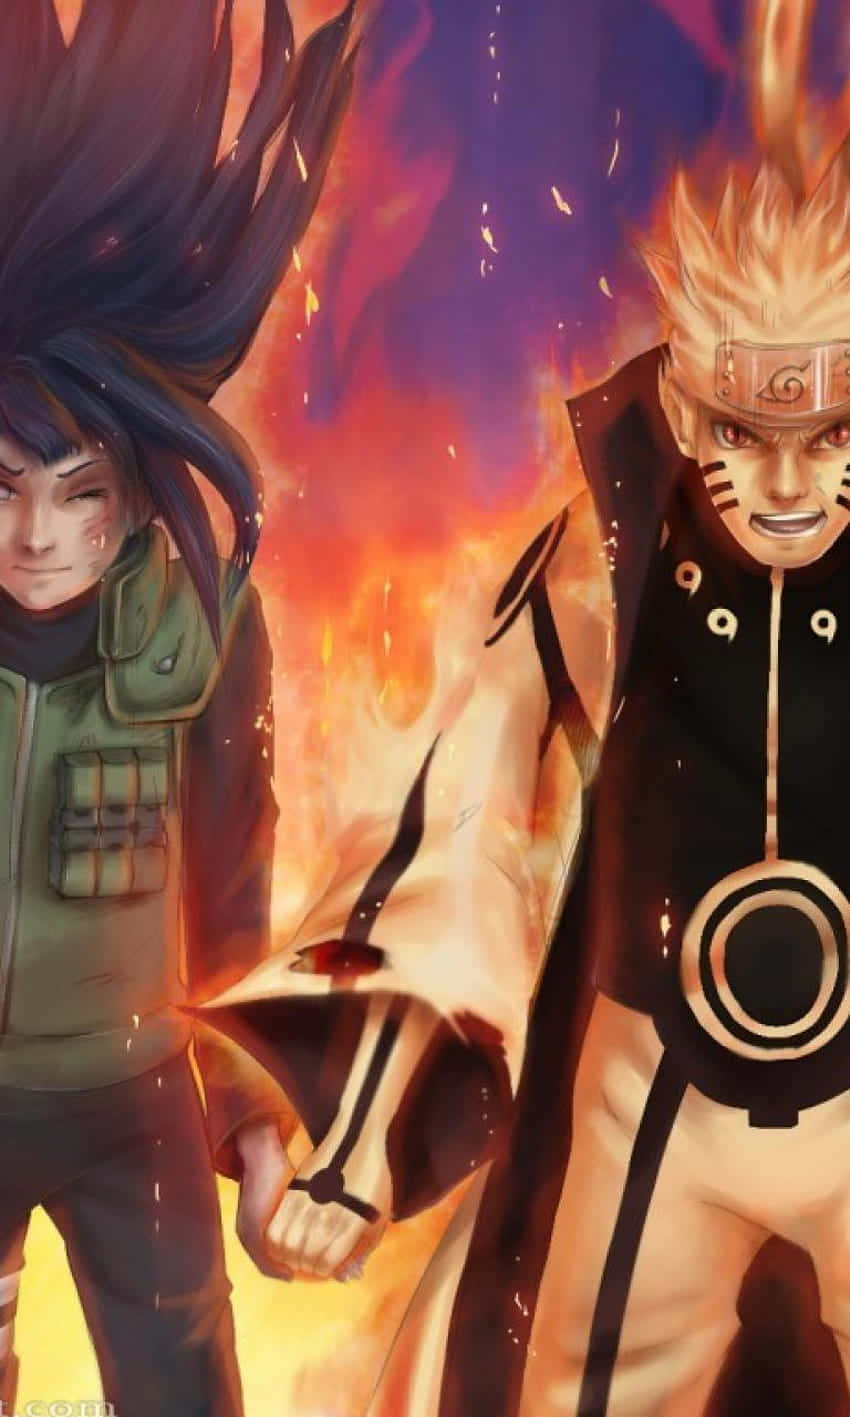 Enjoy the adventures of Connor and his friends with the Naruto Shippuden Iphone! Wallpaper